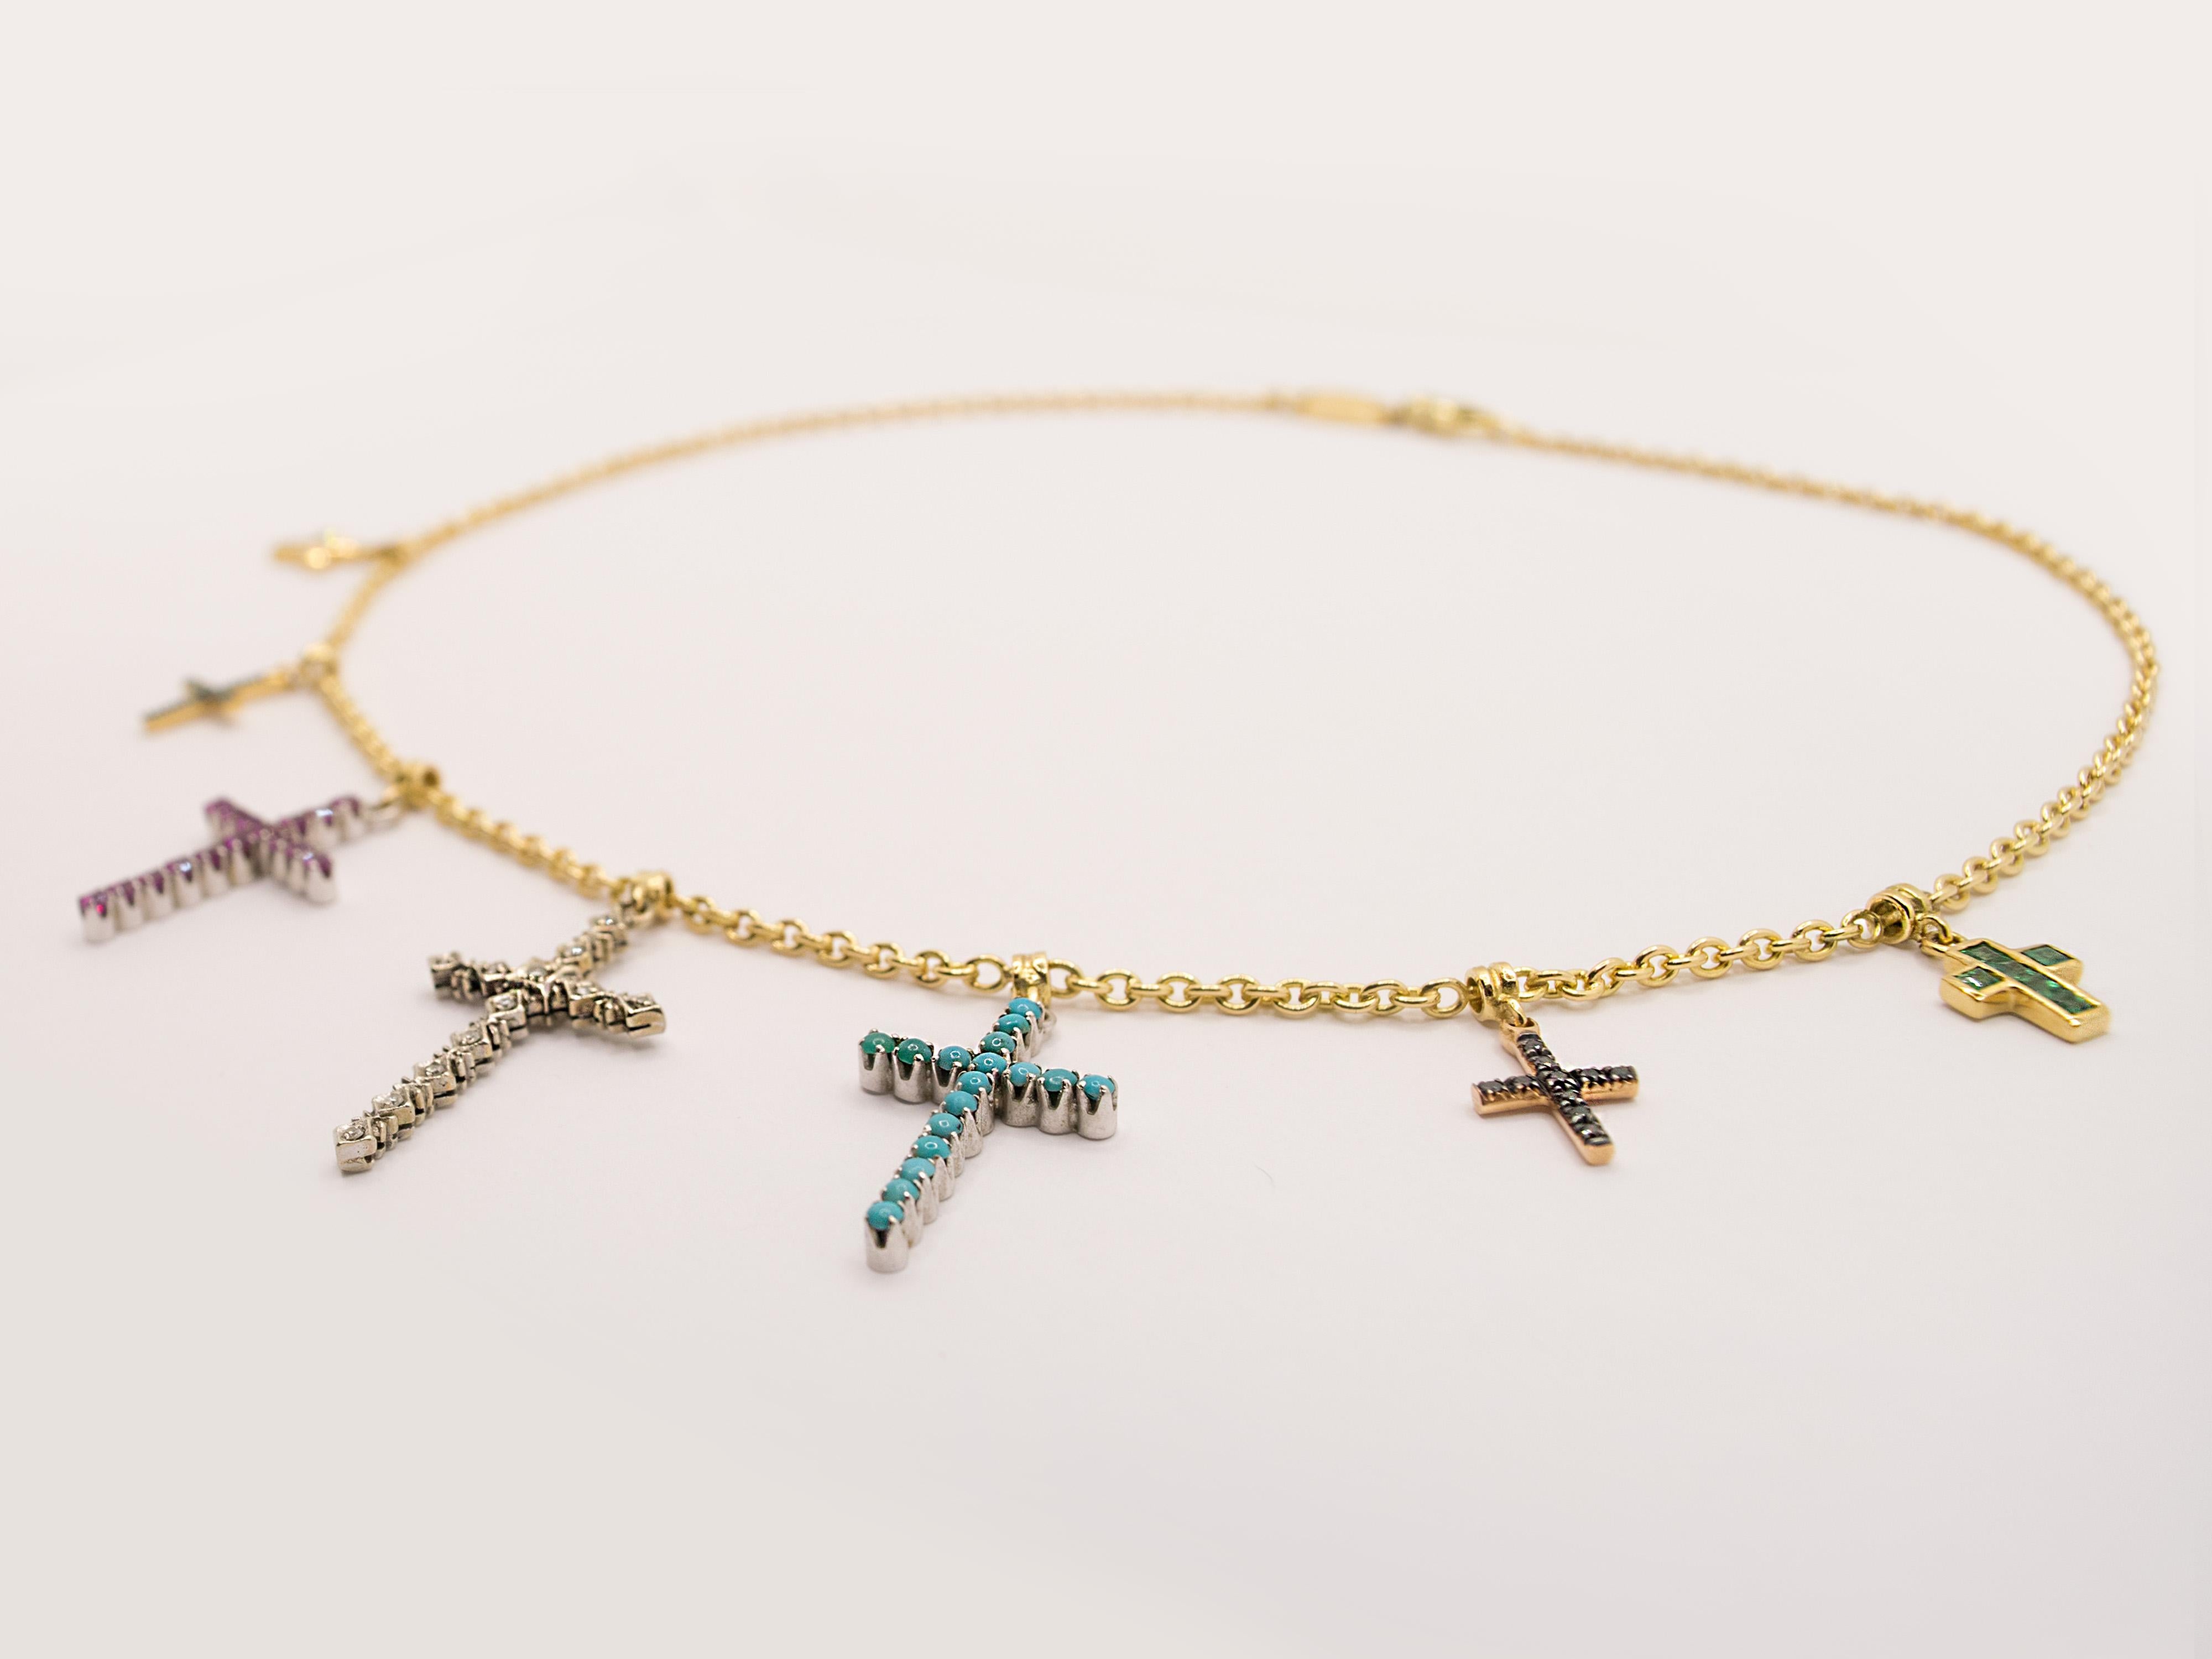 A vintage 18kt yellow gold choker embellished with seven crosses.
These pendants range in size from 0.90x0.70 cm to 3x2 cm.
In order these pendants are yellow gold and carré-cut diamonds, rose gold and tsavorite, white gold and rubies, white gold